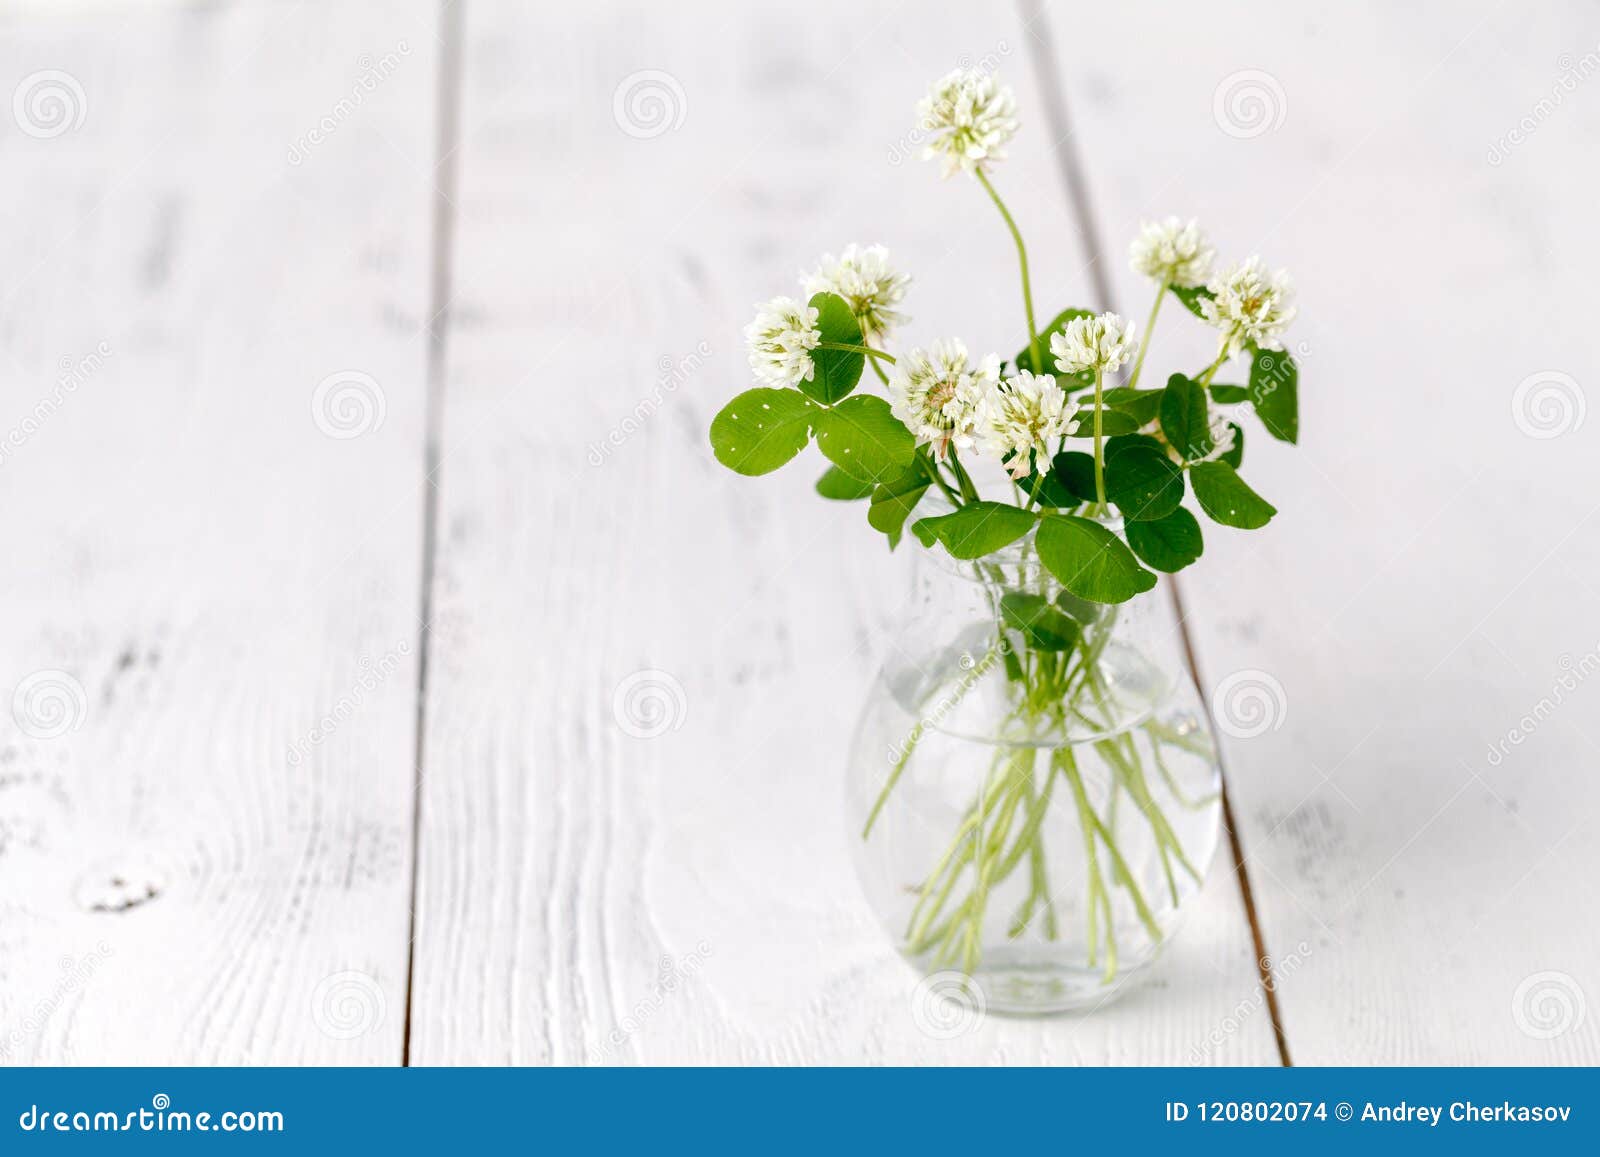 summer mood with white clover on wooden table